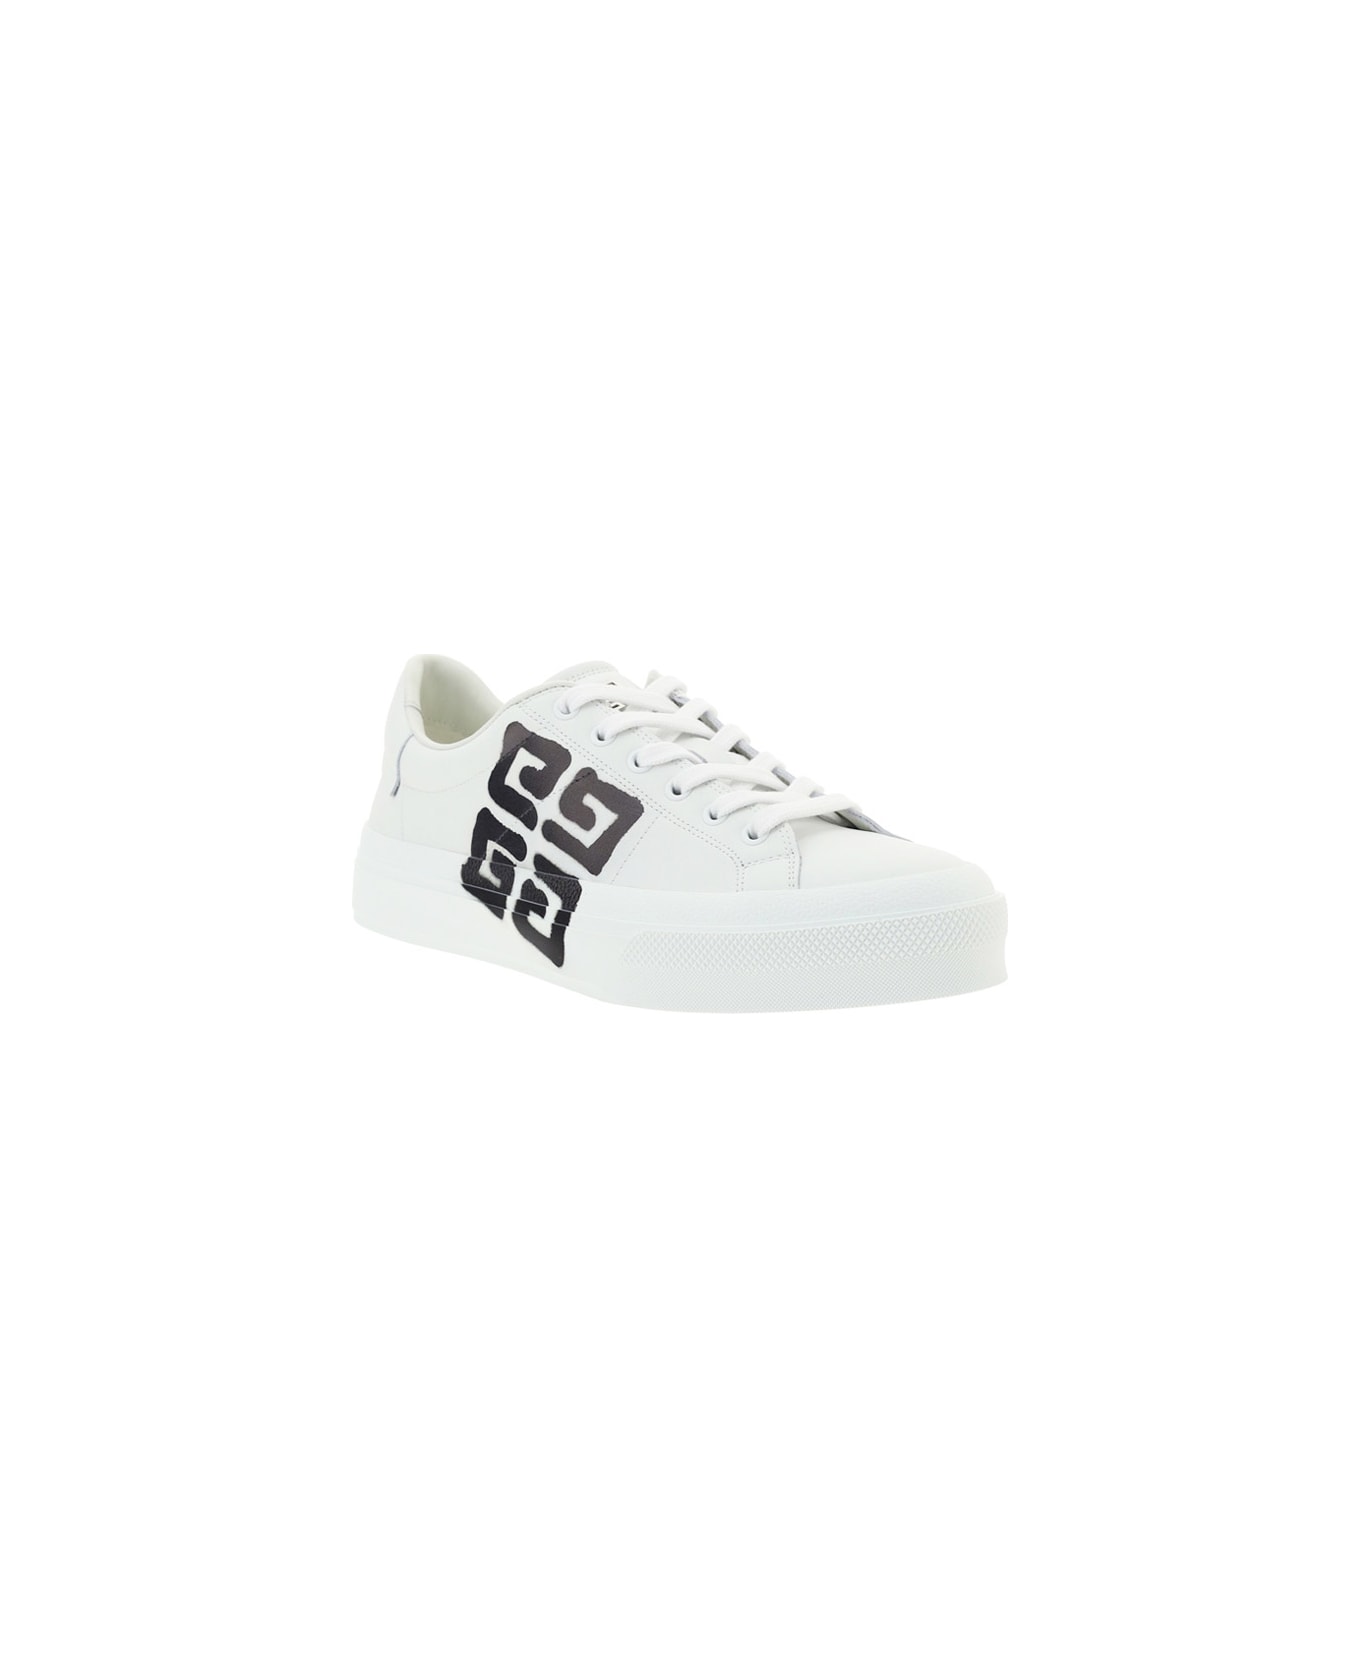 Givenchy Sneakers - White/black